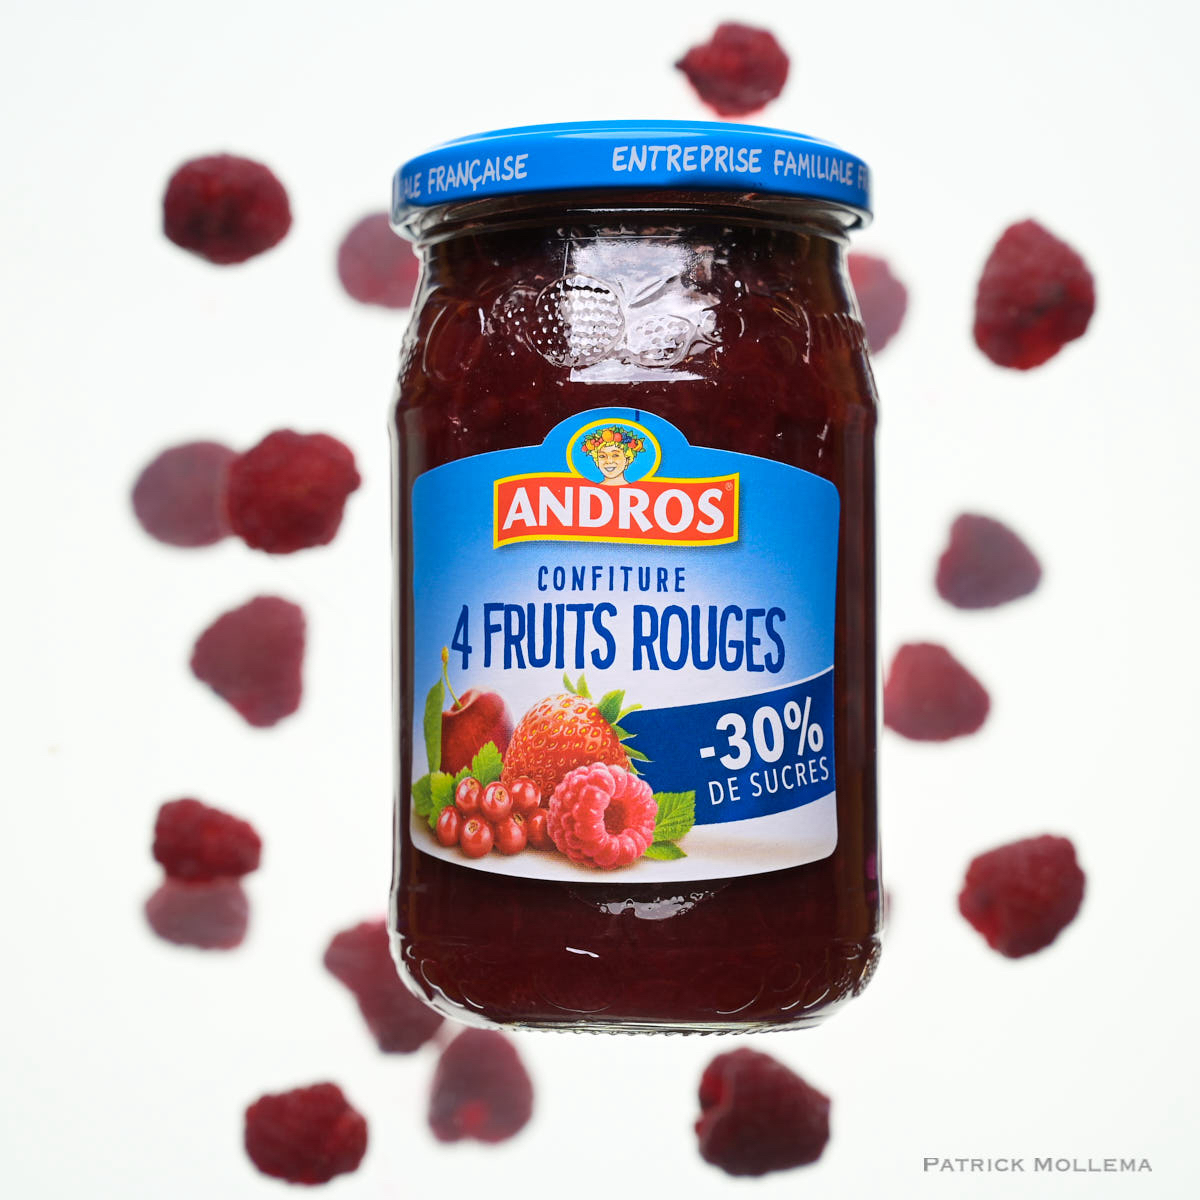 Andros 4 fruits rouges.jpg